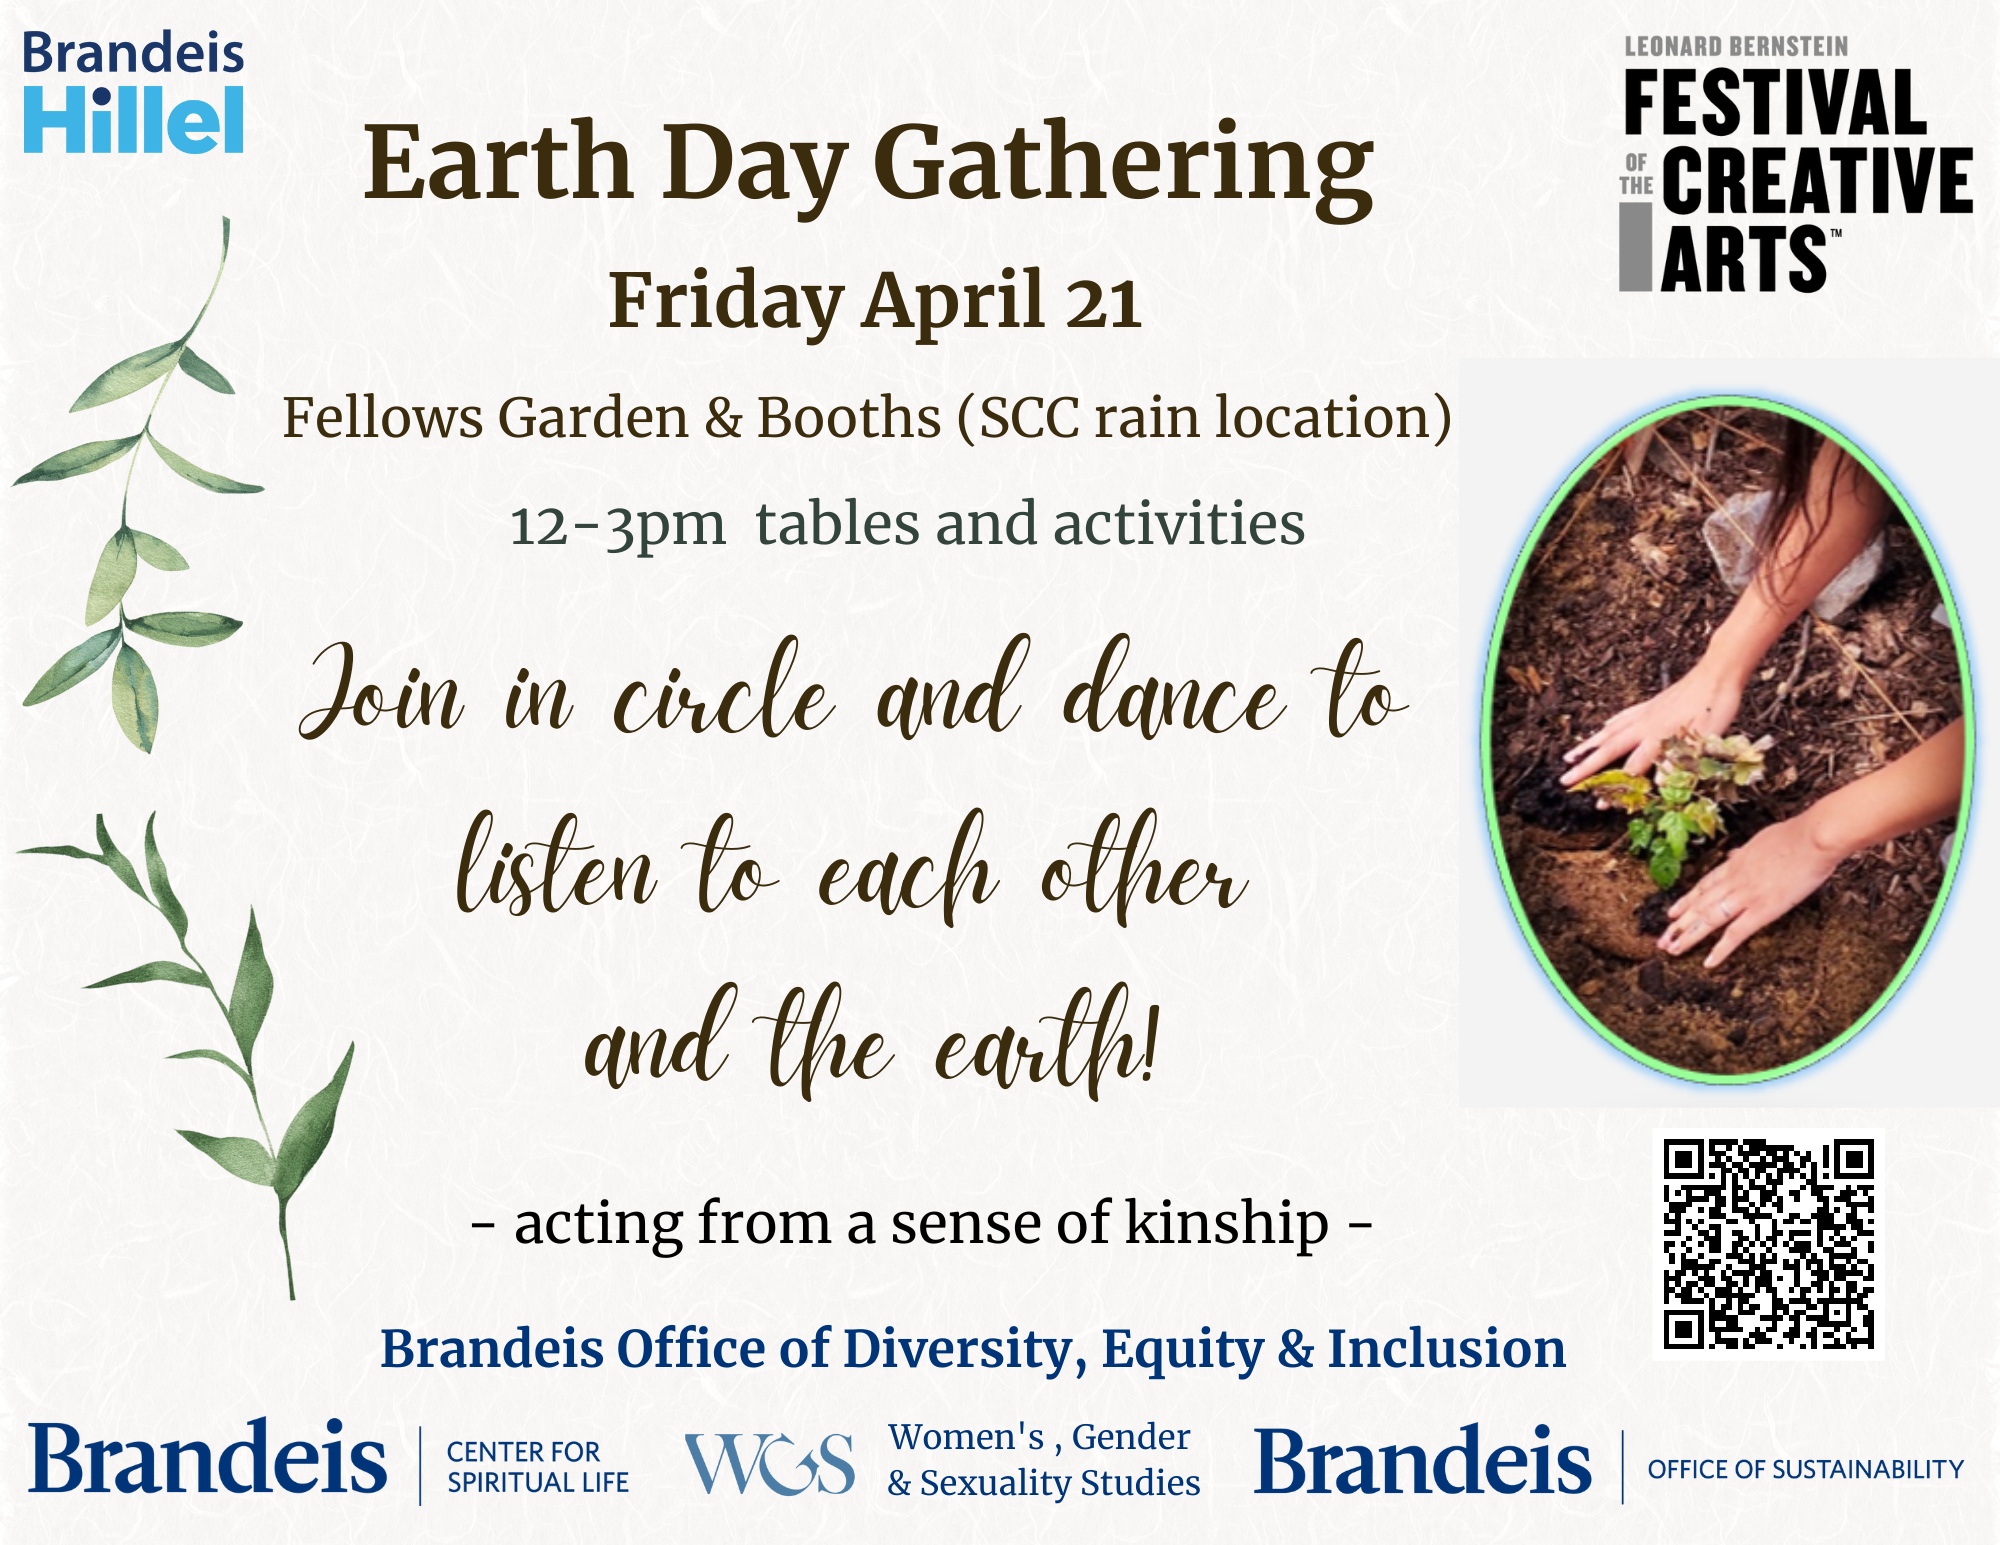 earth day gathering friday april 21 fellows garden and booths (SCC rain location). 12-3pm tables and activities.  Join in circle and dance to listen to each other and the earth. acting from a sense of kinship. 